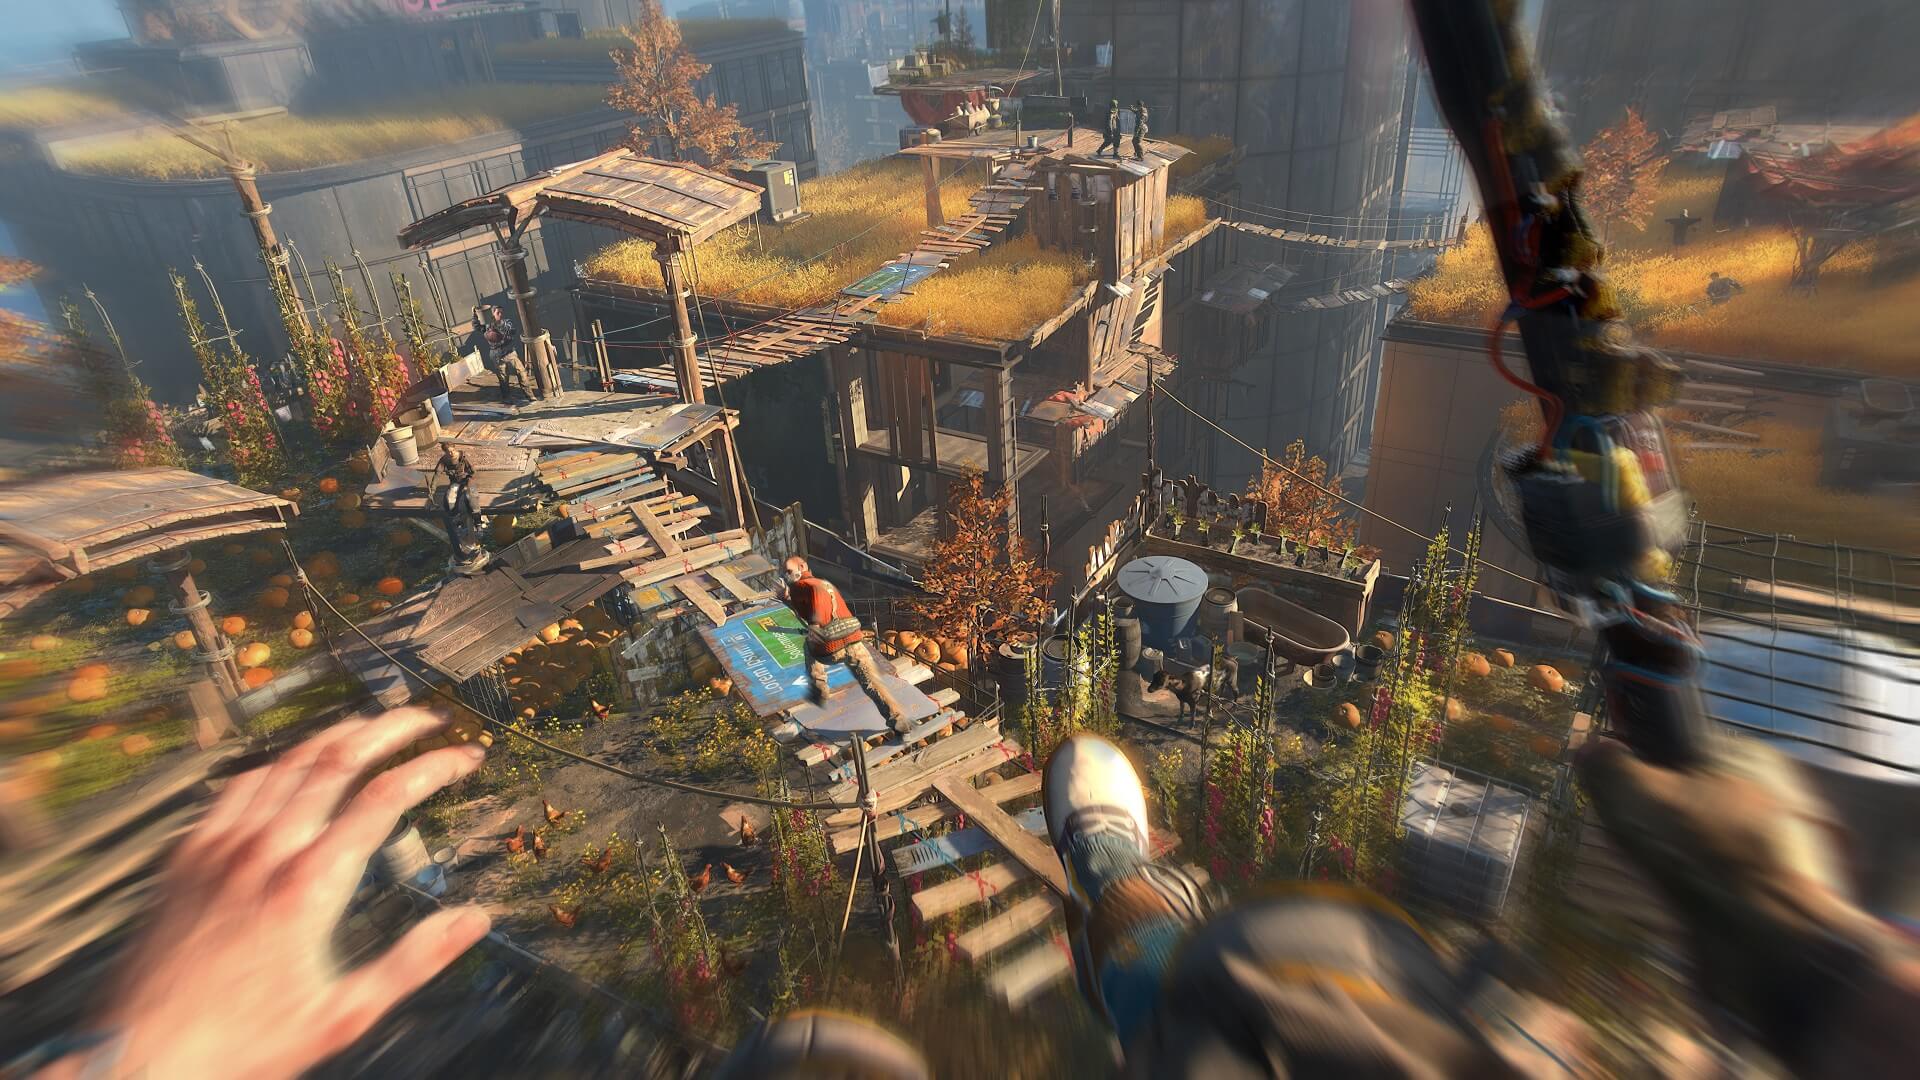 Aiden Caldwell hurtling towards an enemy in Dying Light 2